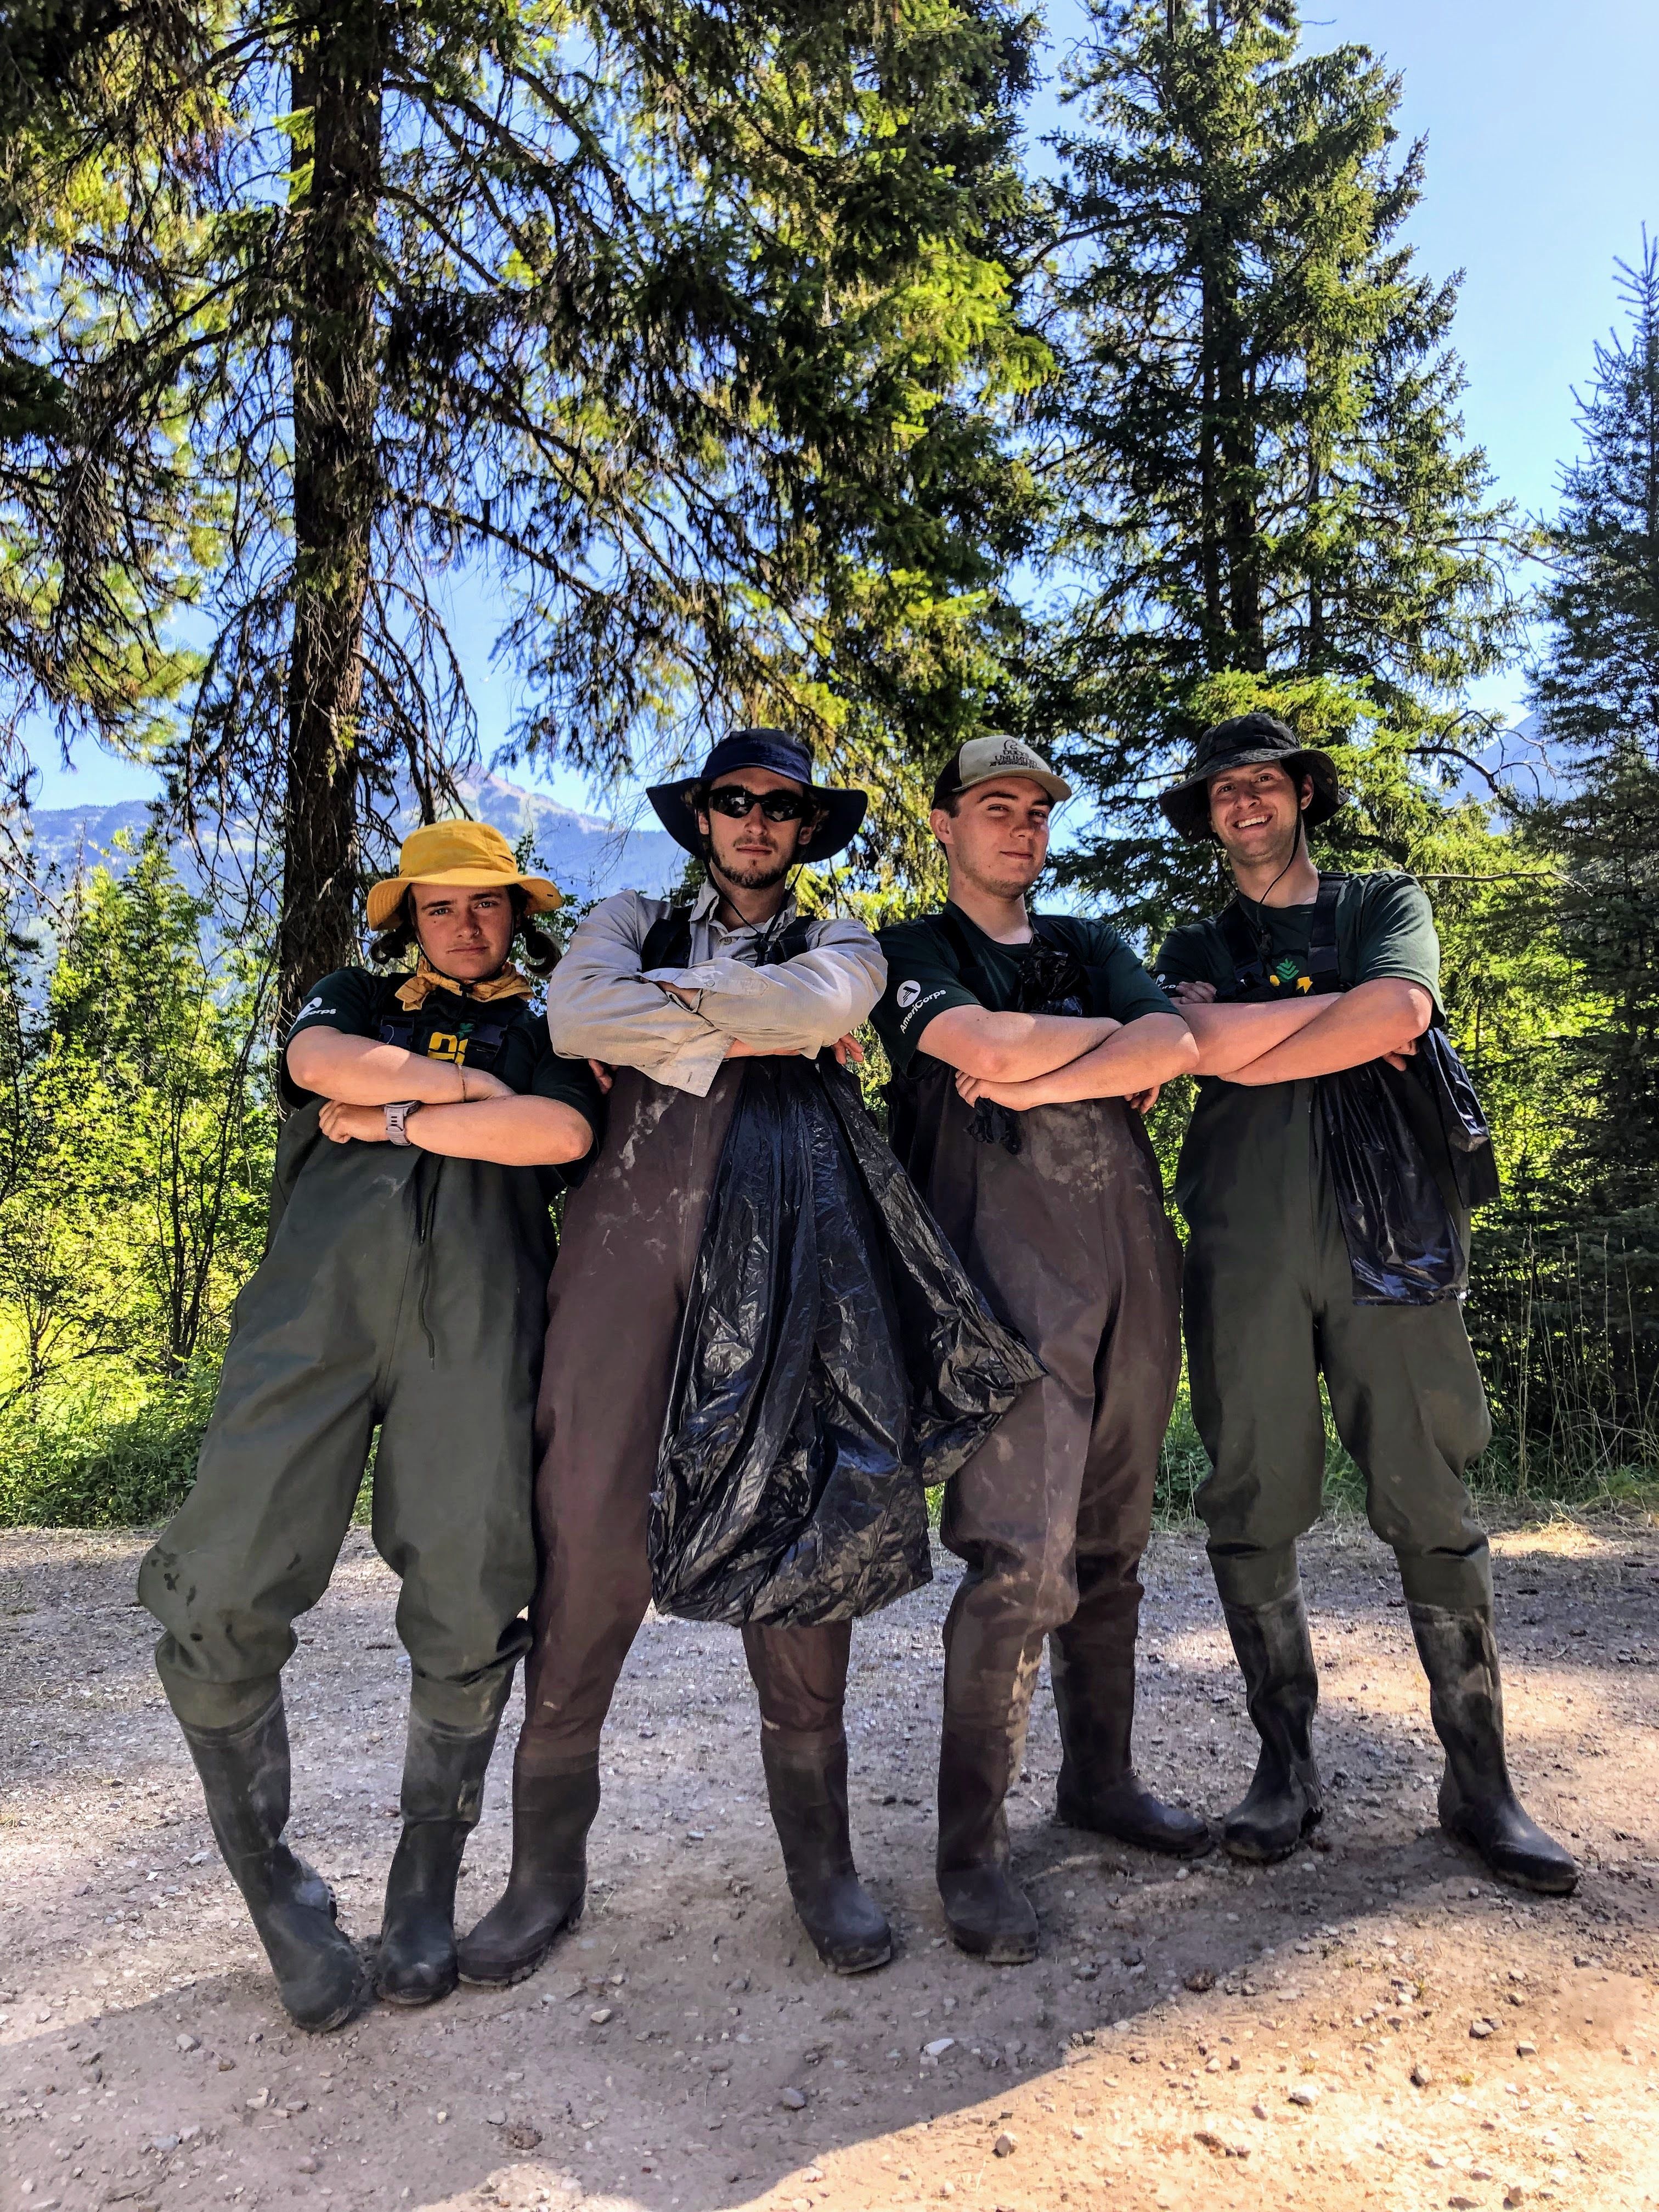 Four people wearing overall, high waders and holding trash bags pose in front of a lake.